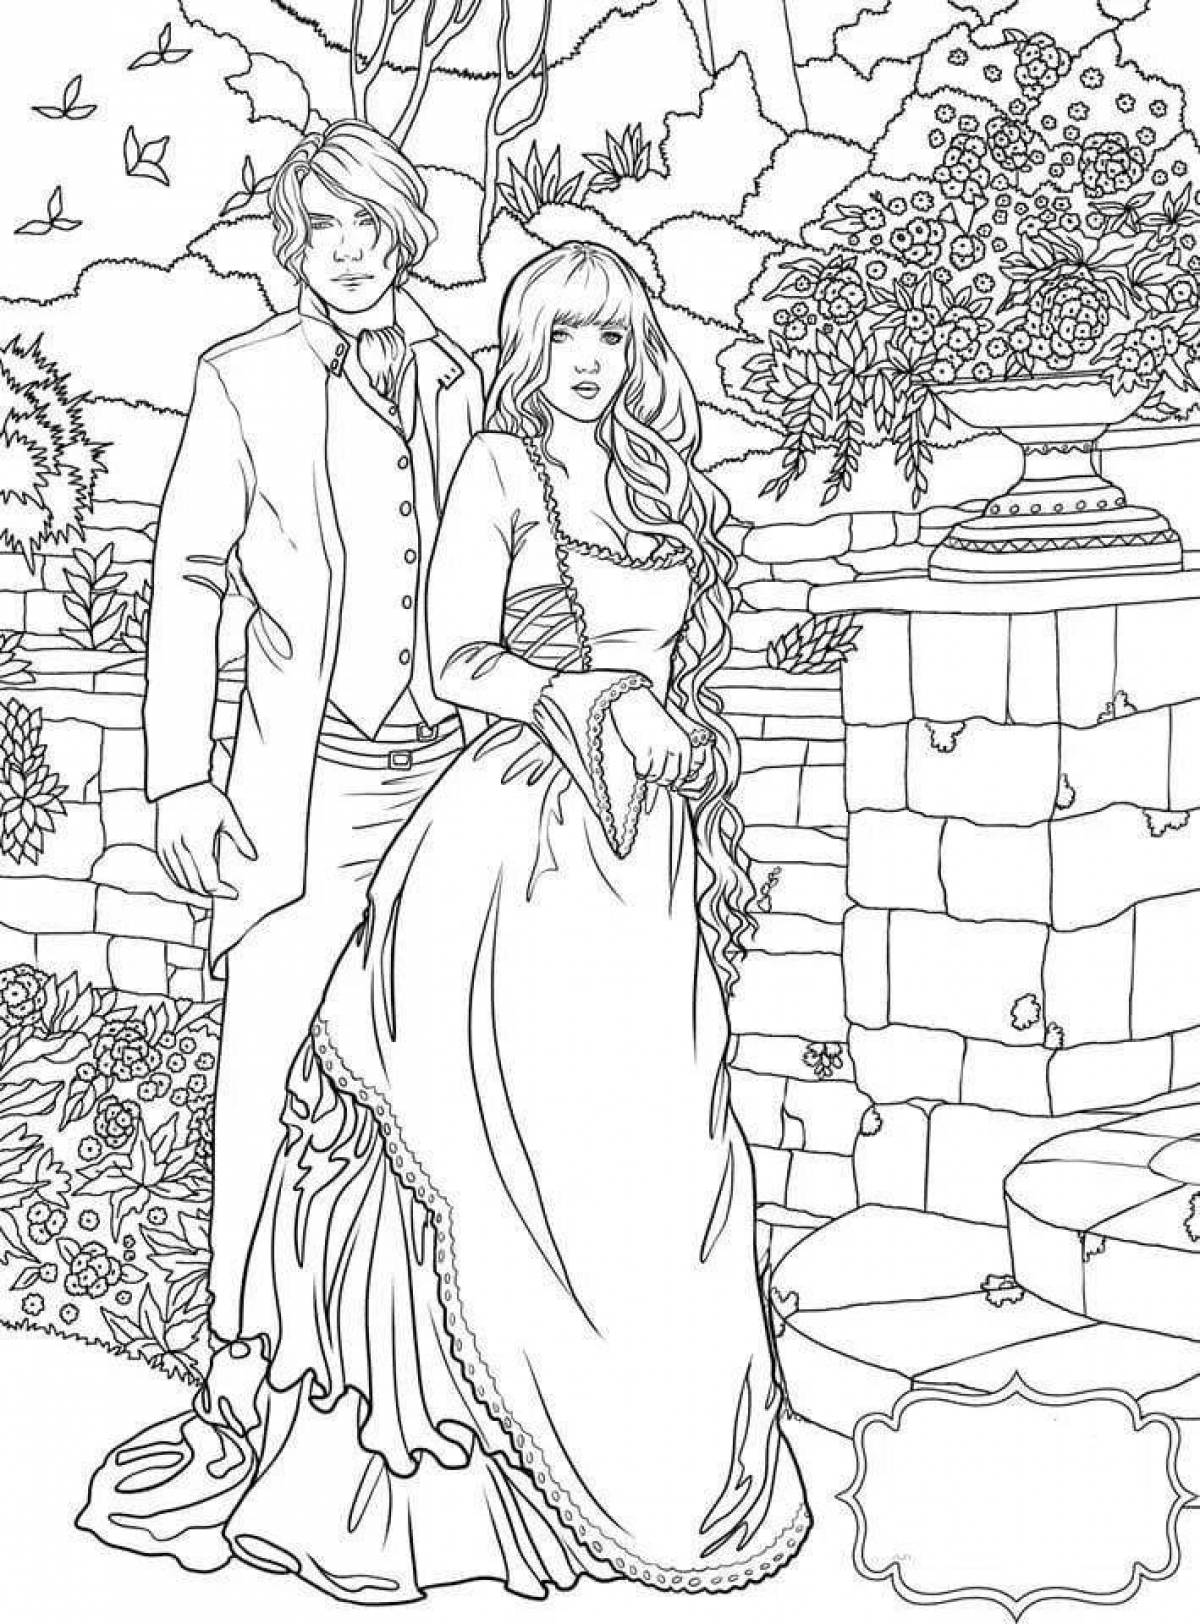 Charming couple in love coloring book